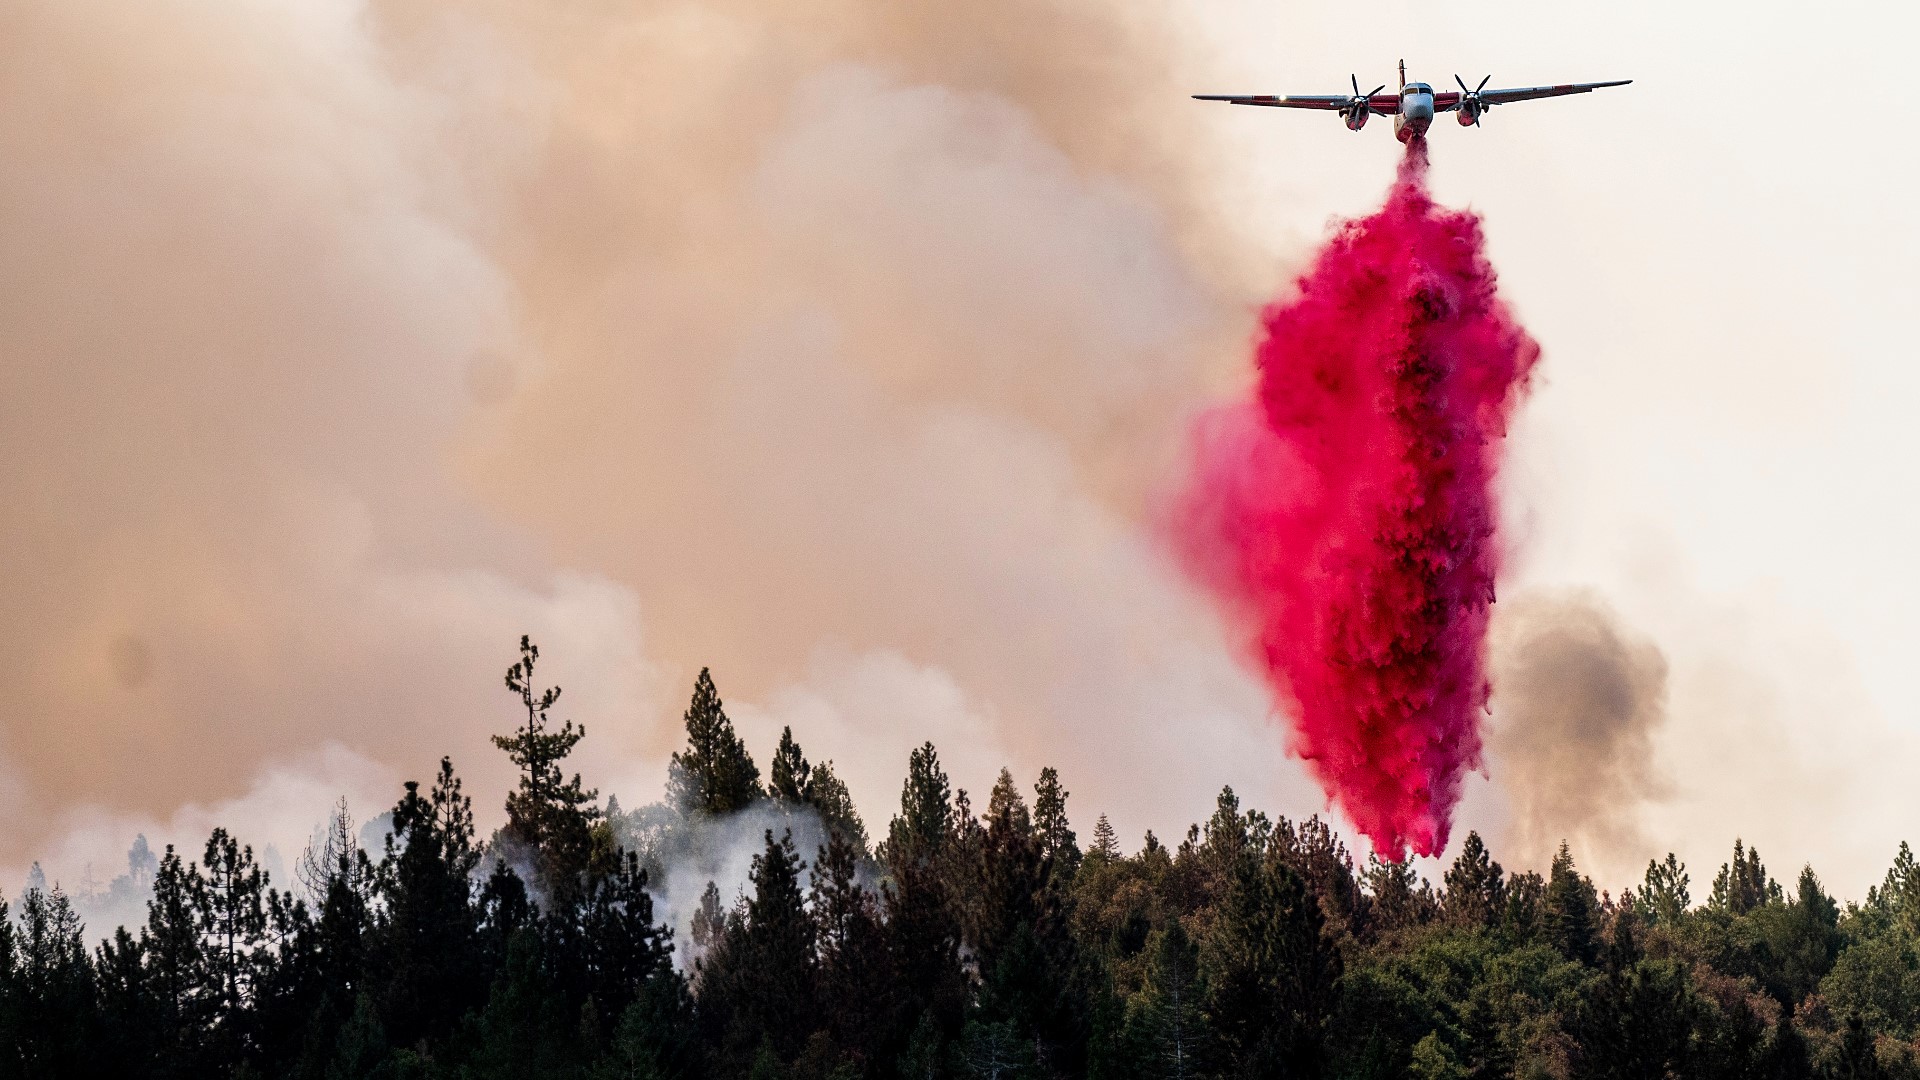 Over the last 10 years, an average of about 39 million gallons of fire retardant has been dropped on wildfires federal, state and private land nationwide